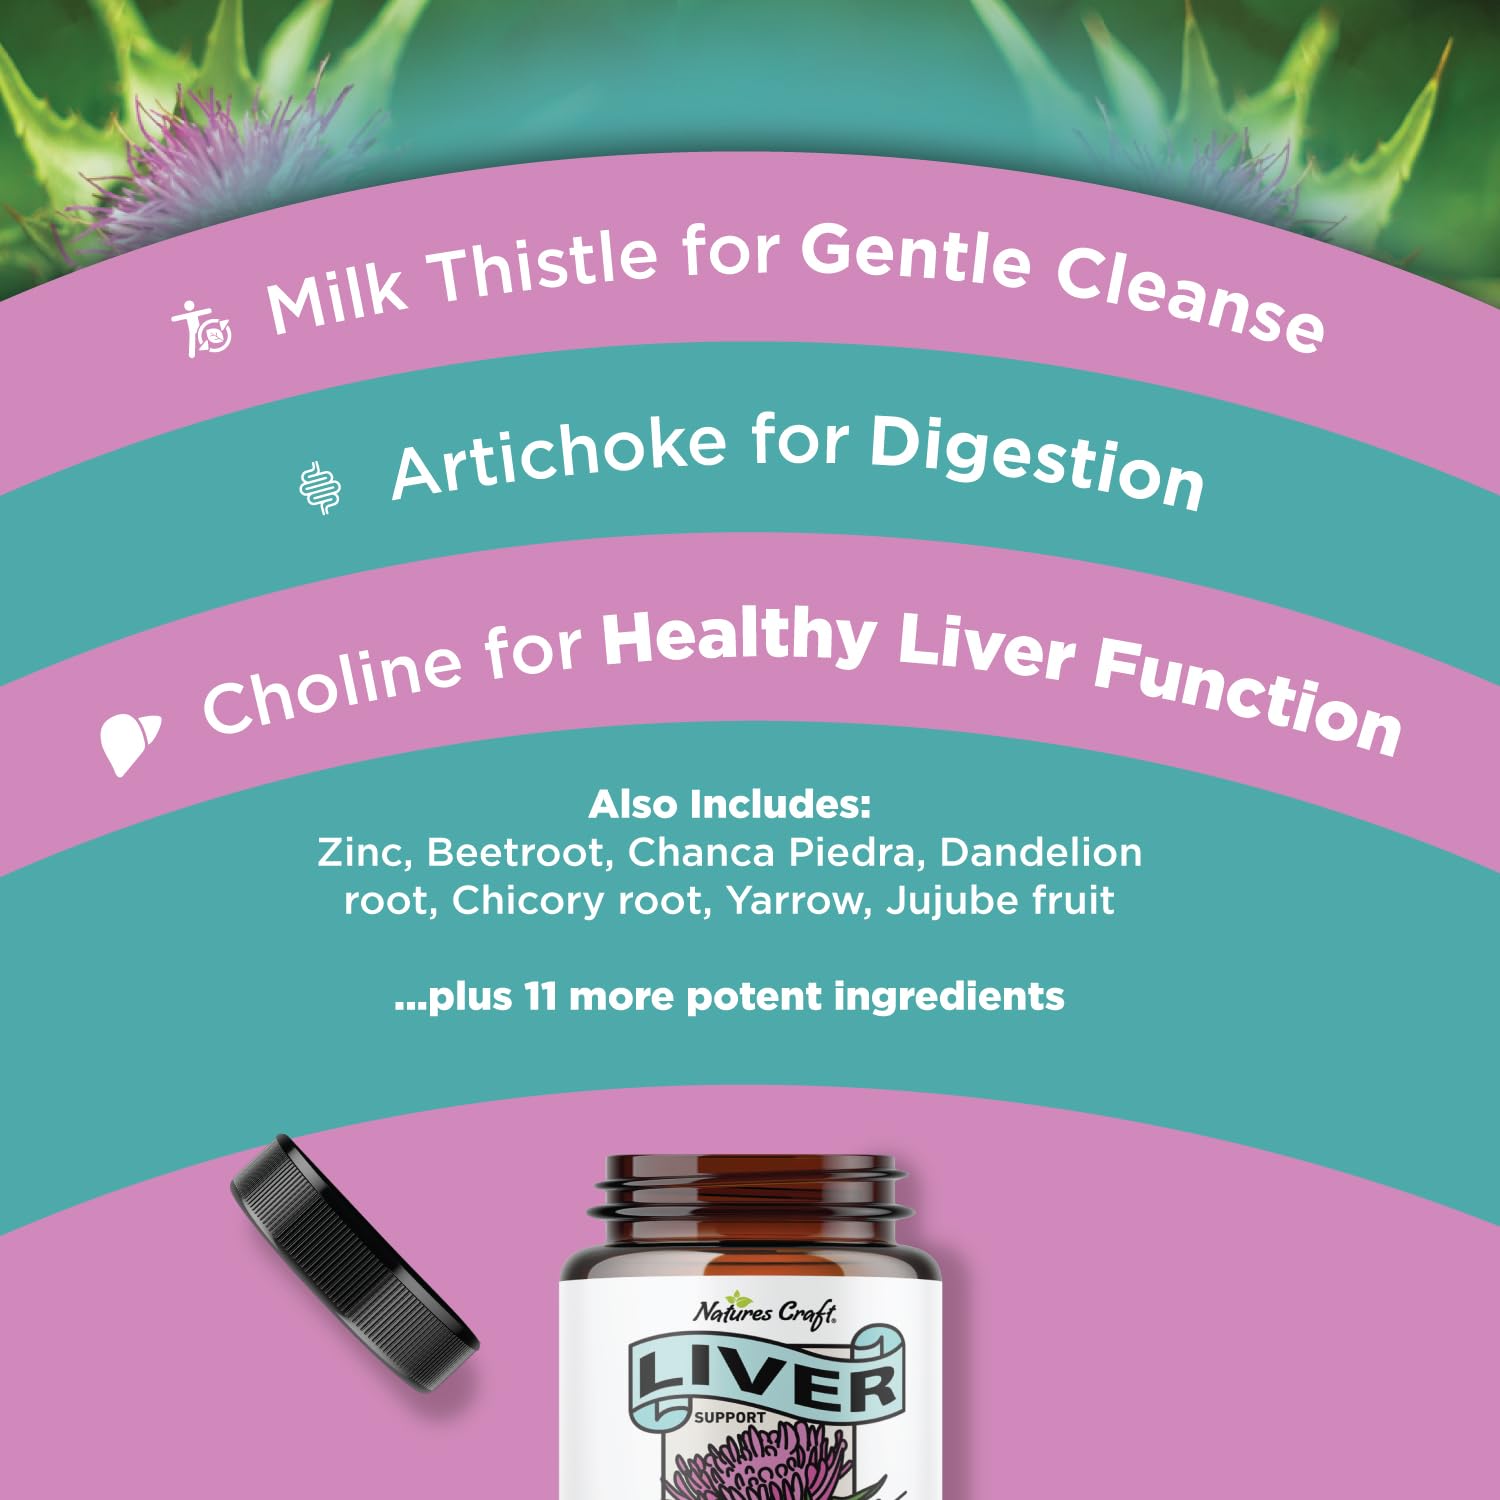 Liver Cleanse Detox & Repair Formula - Herbal Liver Support Supplement with Milk Thistle Dandelion Root Turmeric and Artichoke Extract for Liver Health - Silymarin Milk Thistle Liver Detox 70 Capsules